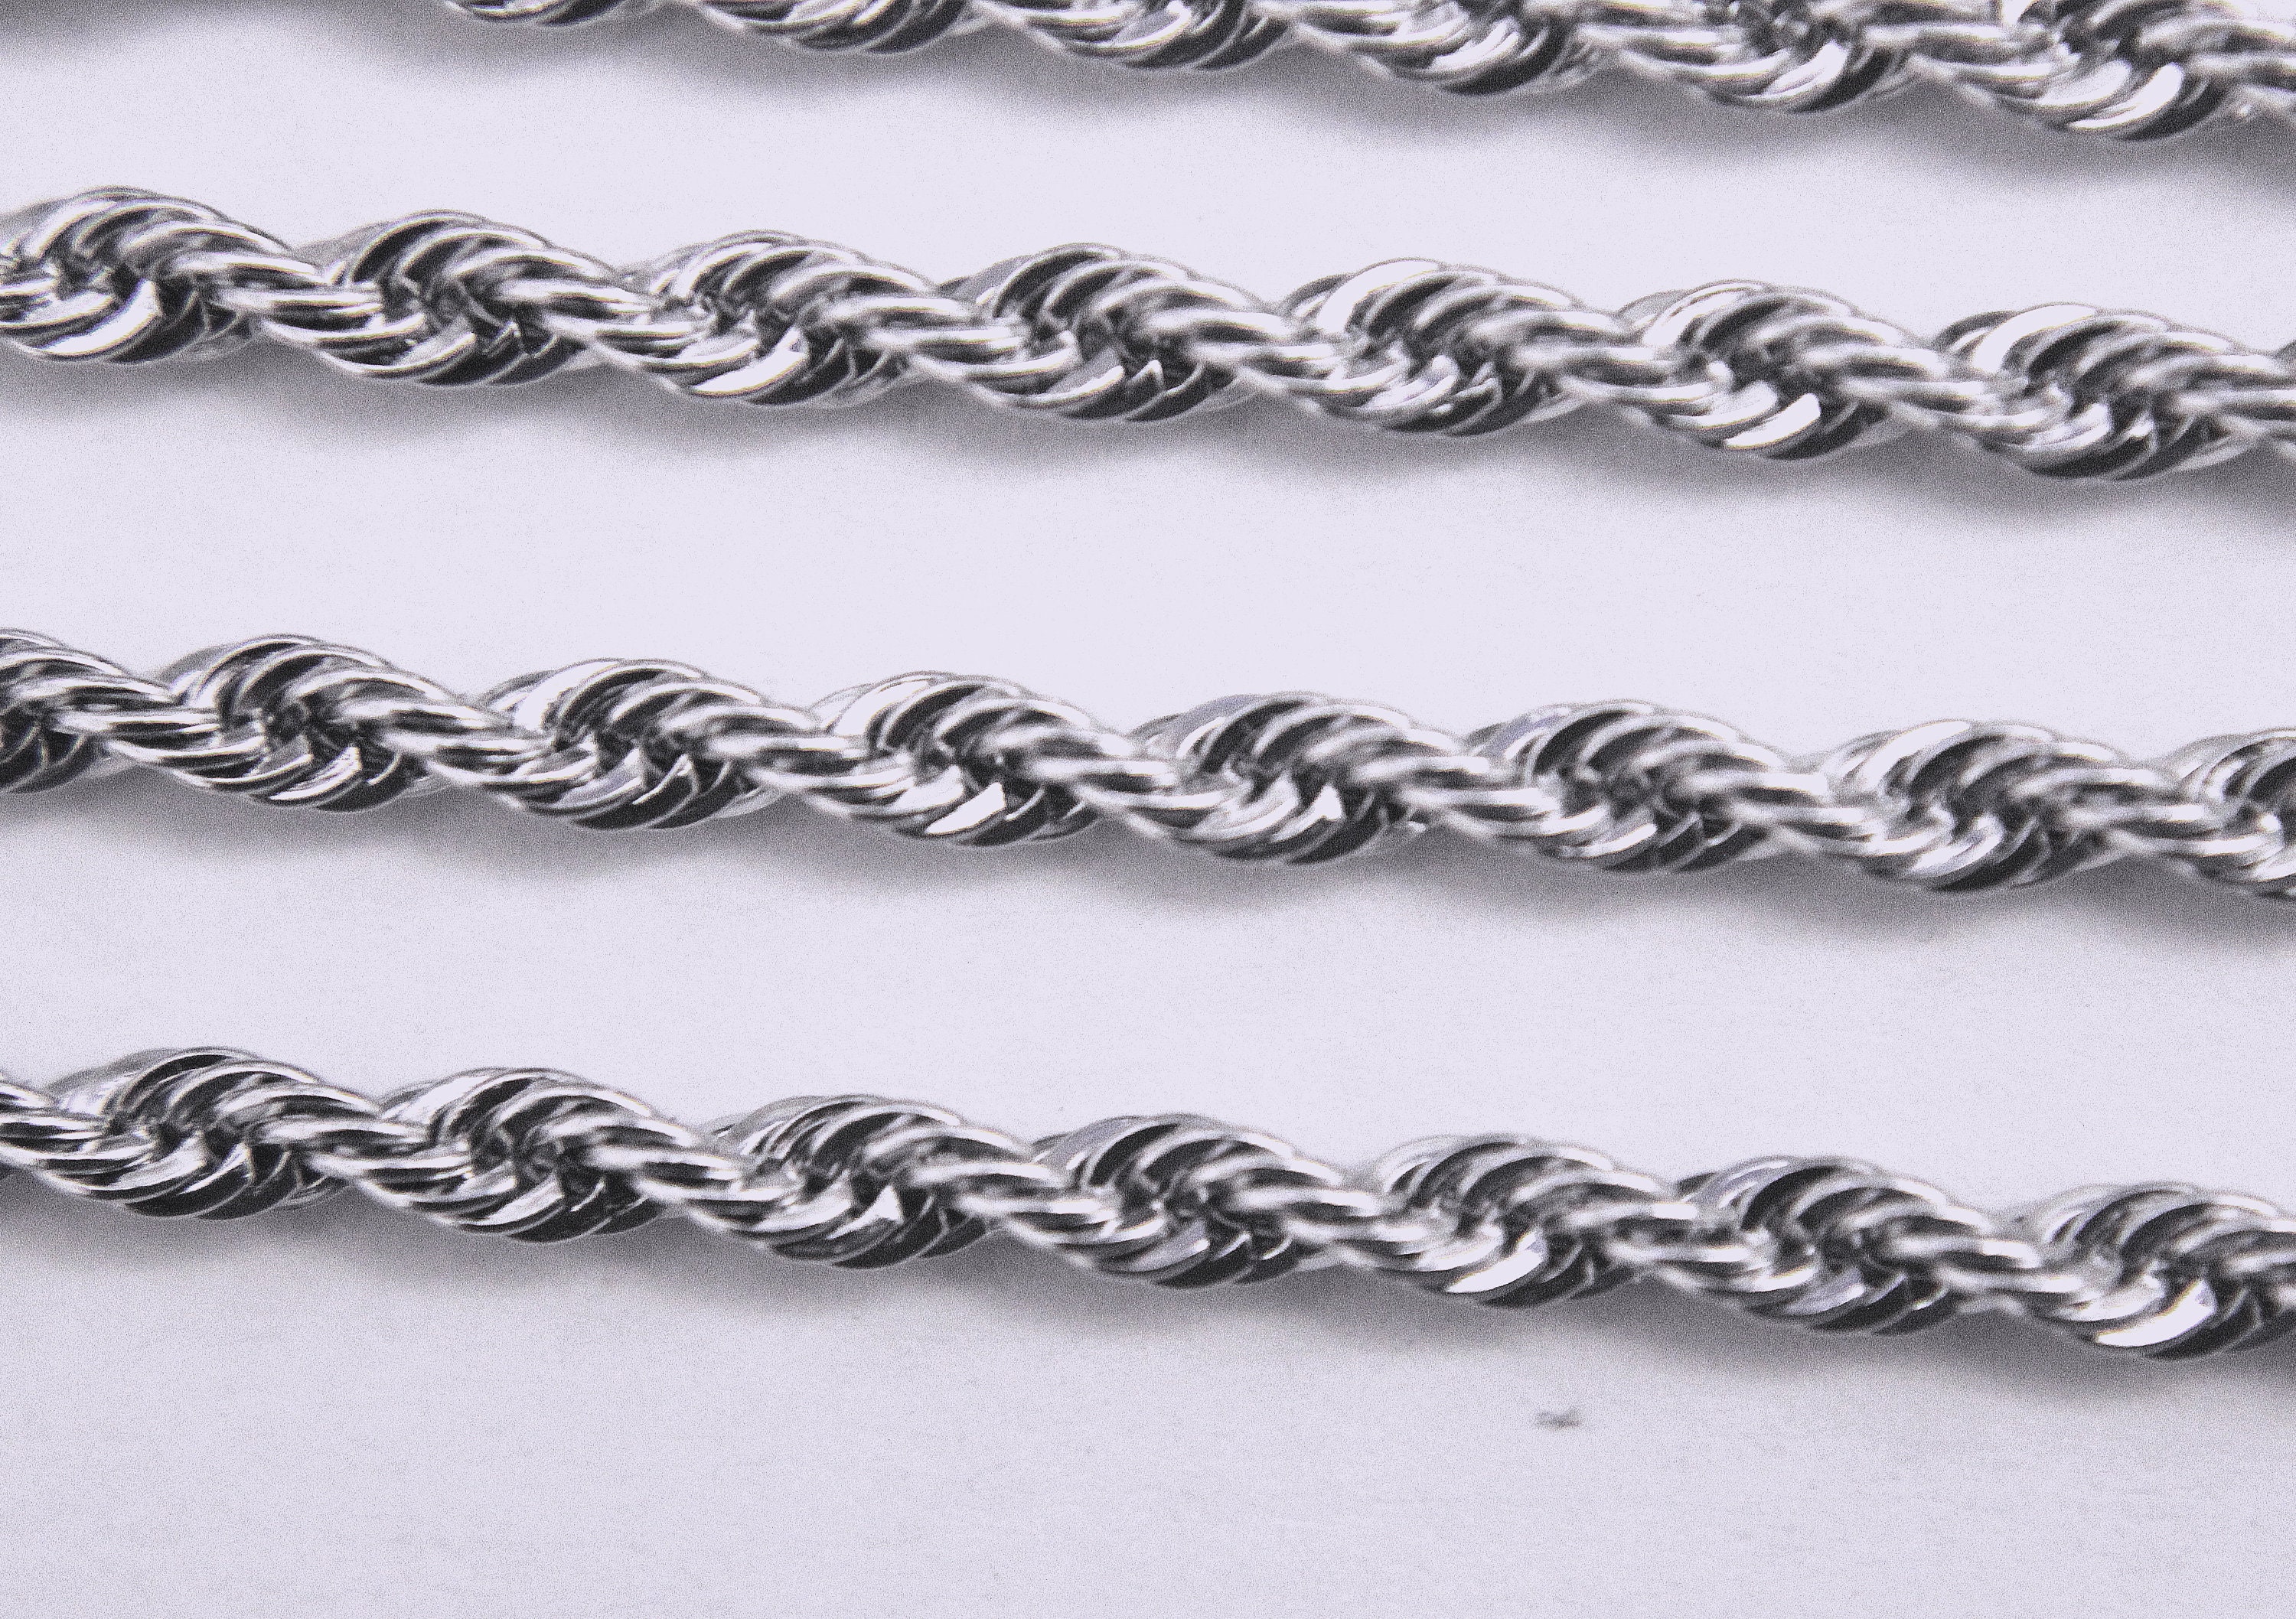 BULK 10 Stainless Steel 20 Braided Rope Necklace Chain C809 